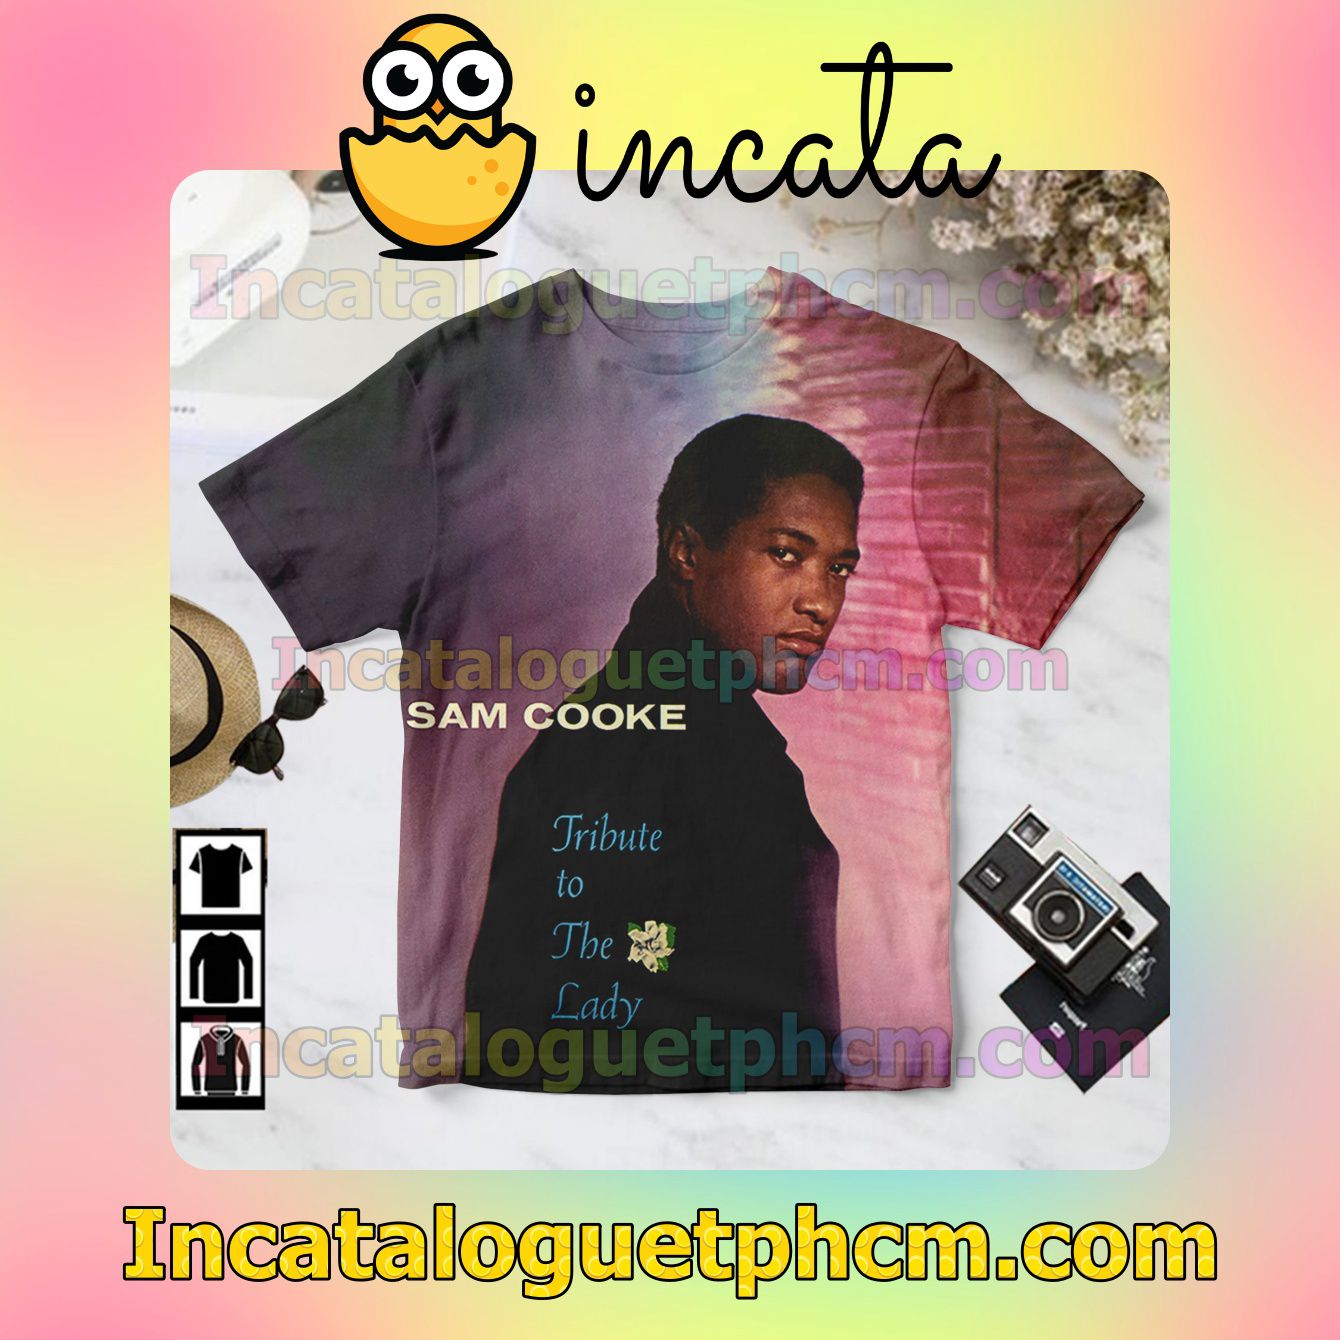 Sam Cooke Tribute To The Lady Album Cover Gift Shirt